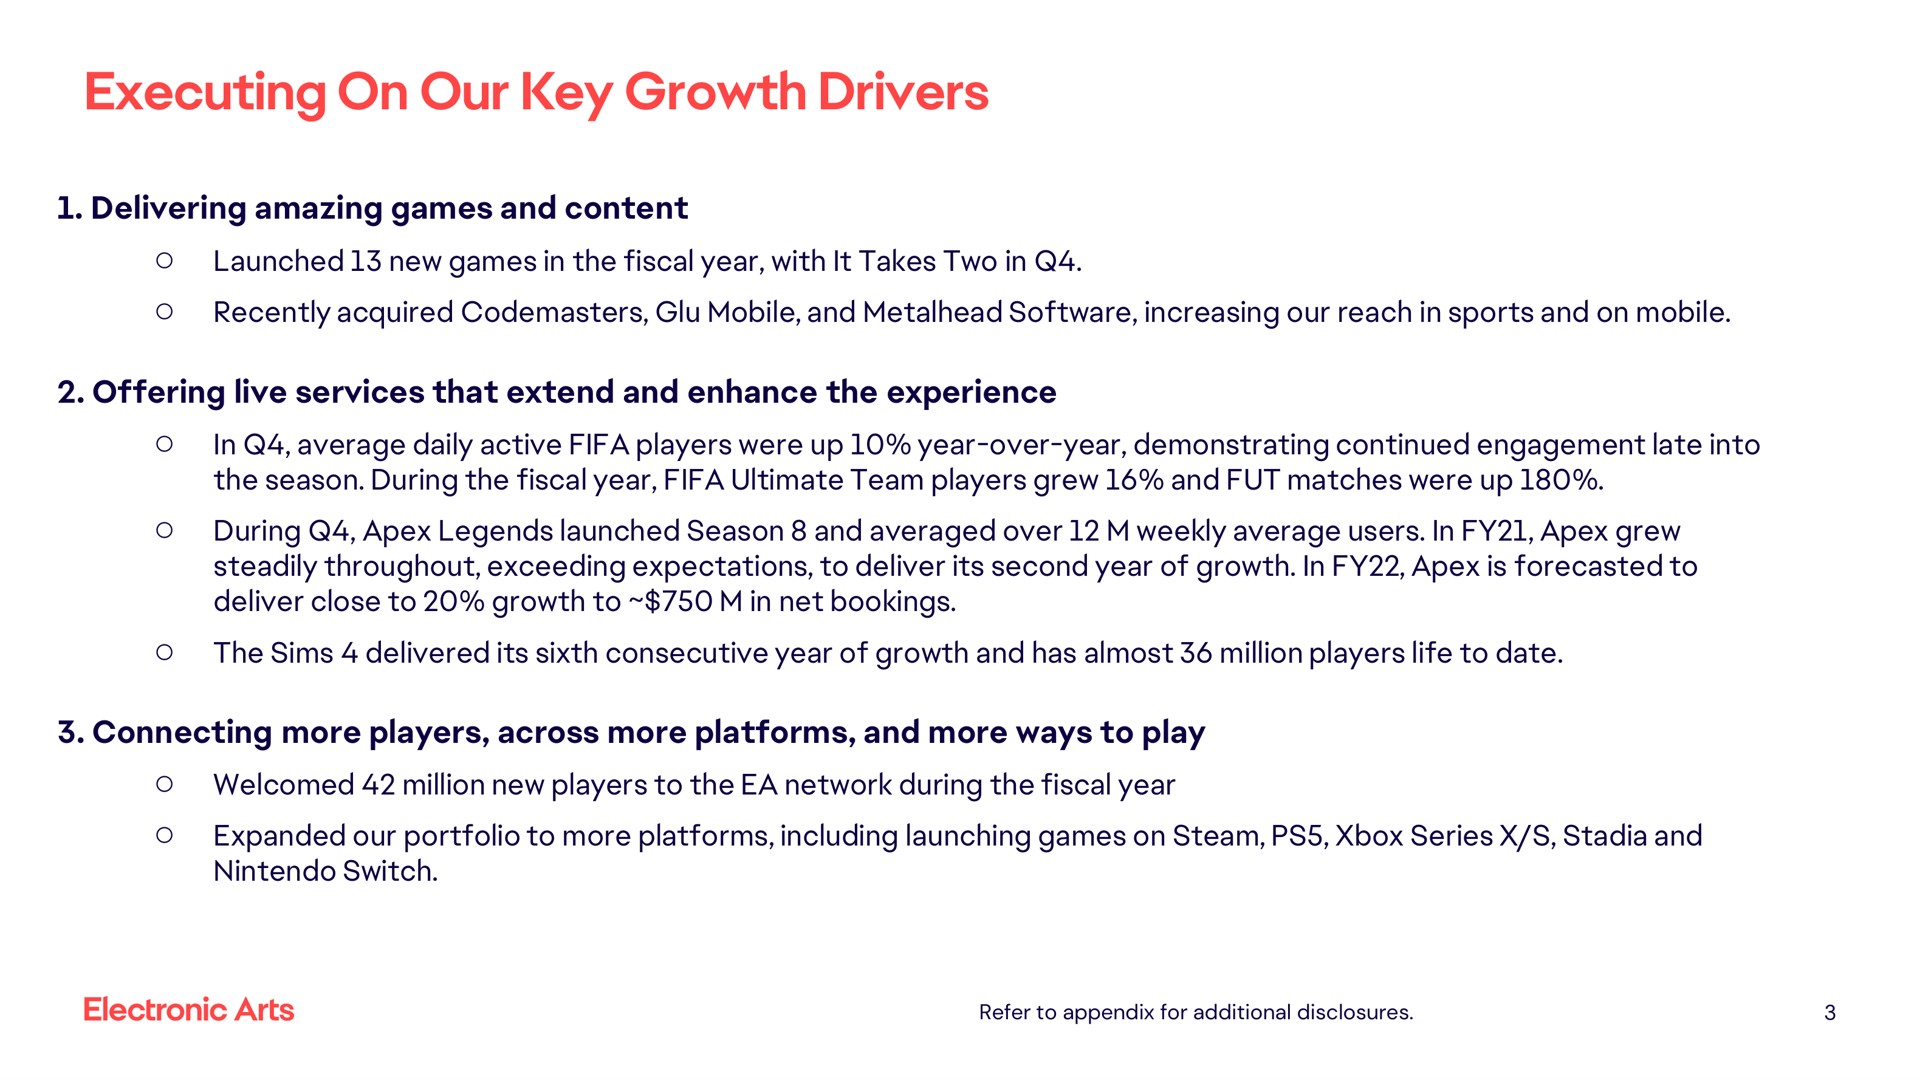 executing on our key growth drivers delivering amazing games and content offering live services that extend and enhance the experience connecting more players across more platforms and more ways to play | Electronic Arts